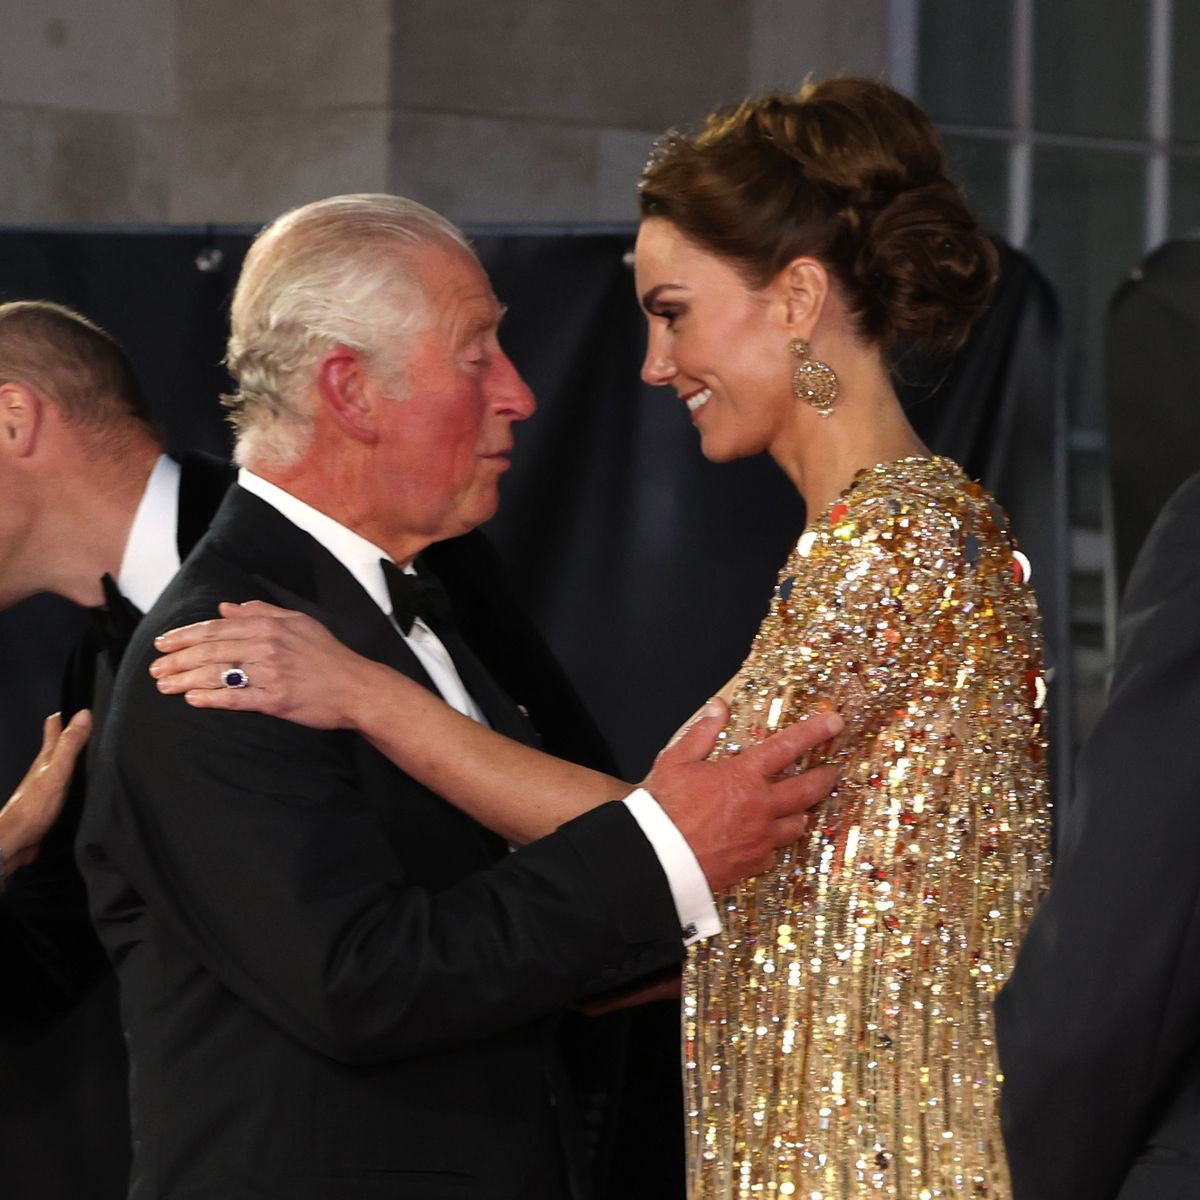 Princess Catherine The Princess of Wales and King Charles III could there ever be a more proud father in law please like and retweet #royal  #PrincessCatherineofWales #PrincessCatherine #PrincessofWales #KateMiddleton #KateTheGreat